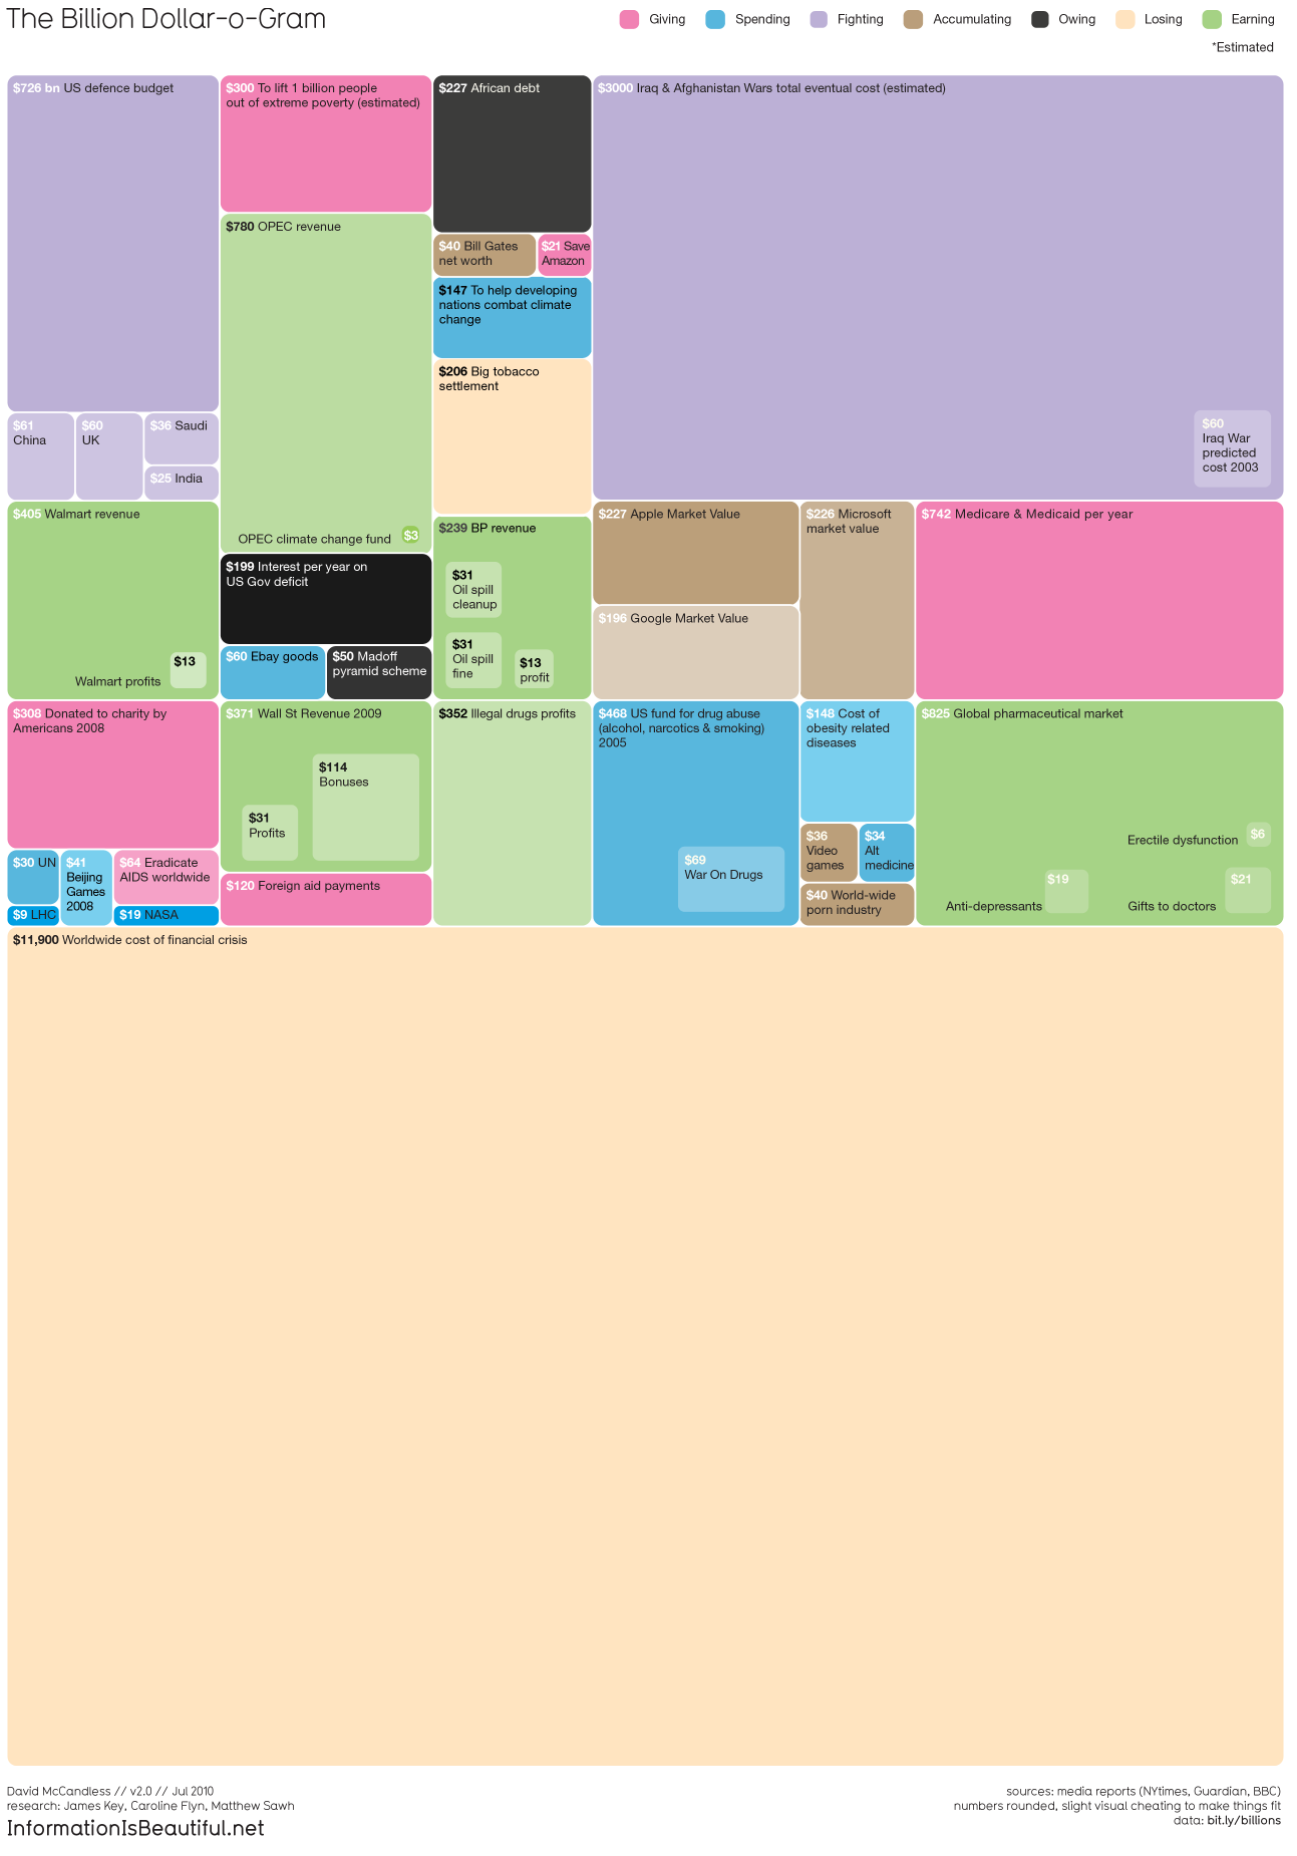 Beautiful treemap visualisation showing size of billions of dollars by David Mcandless at Information is beautiful